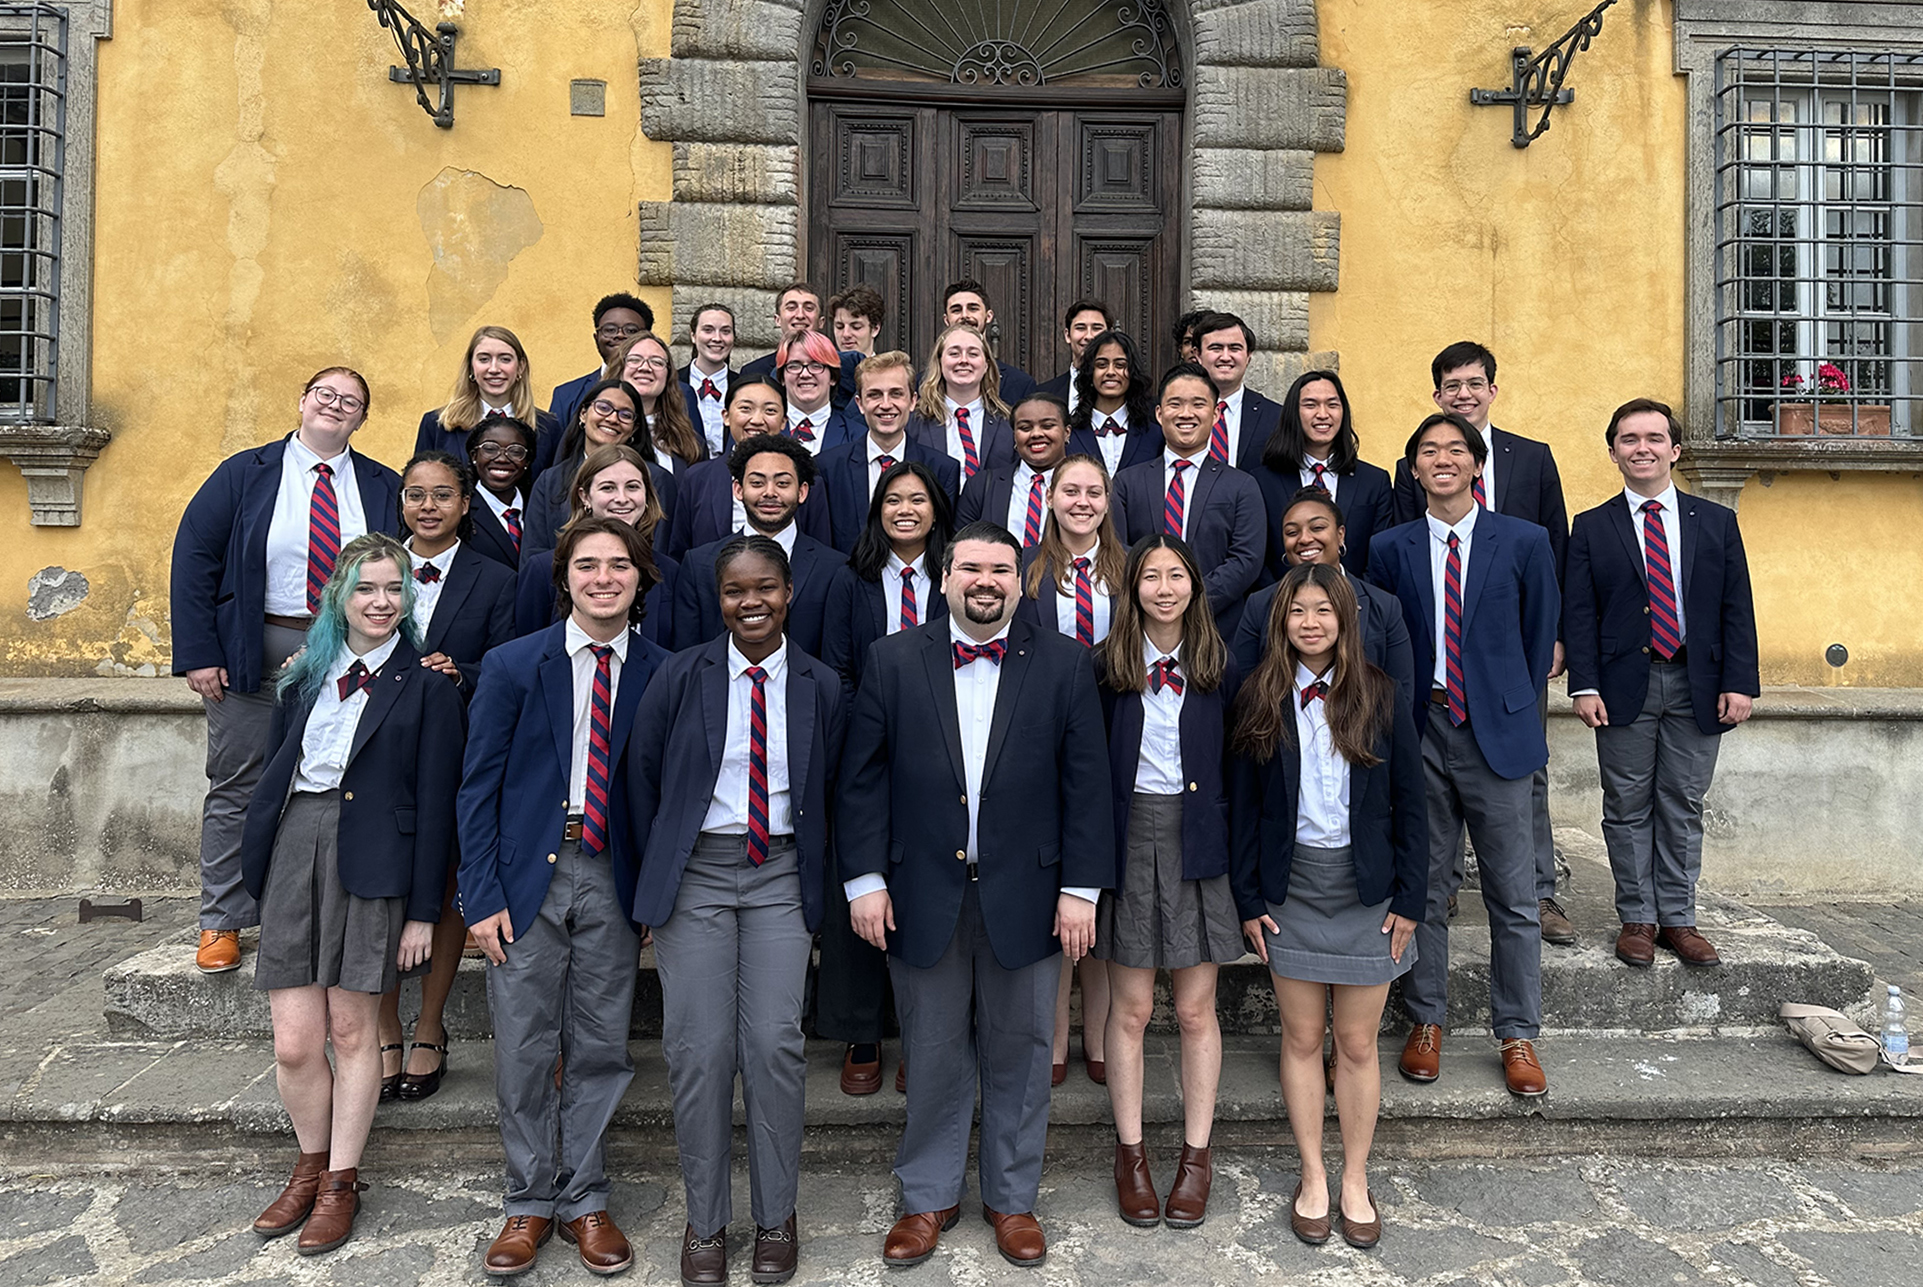 Members of the Penn Glee Club and its director in uniform in Italy.